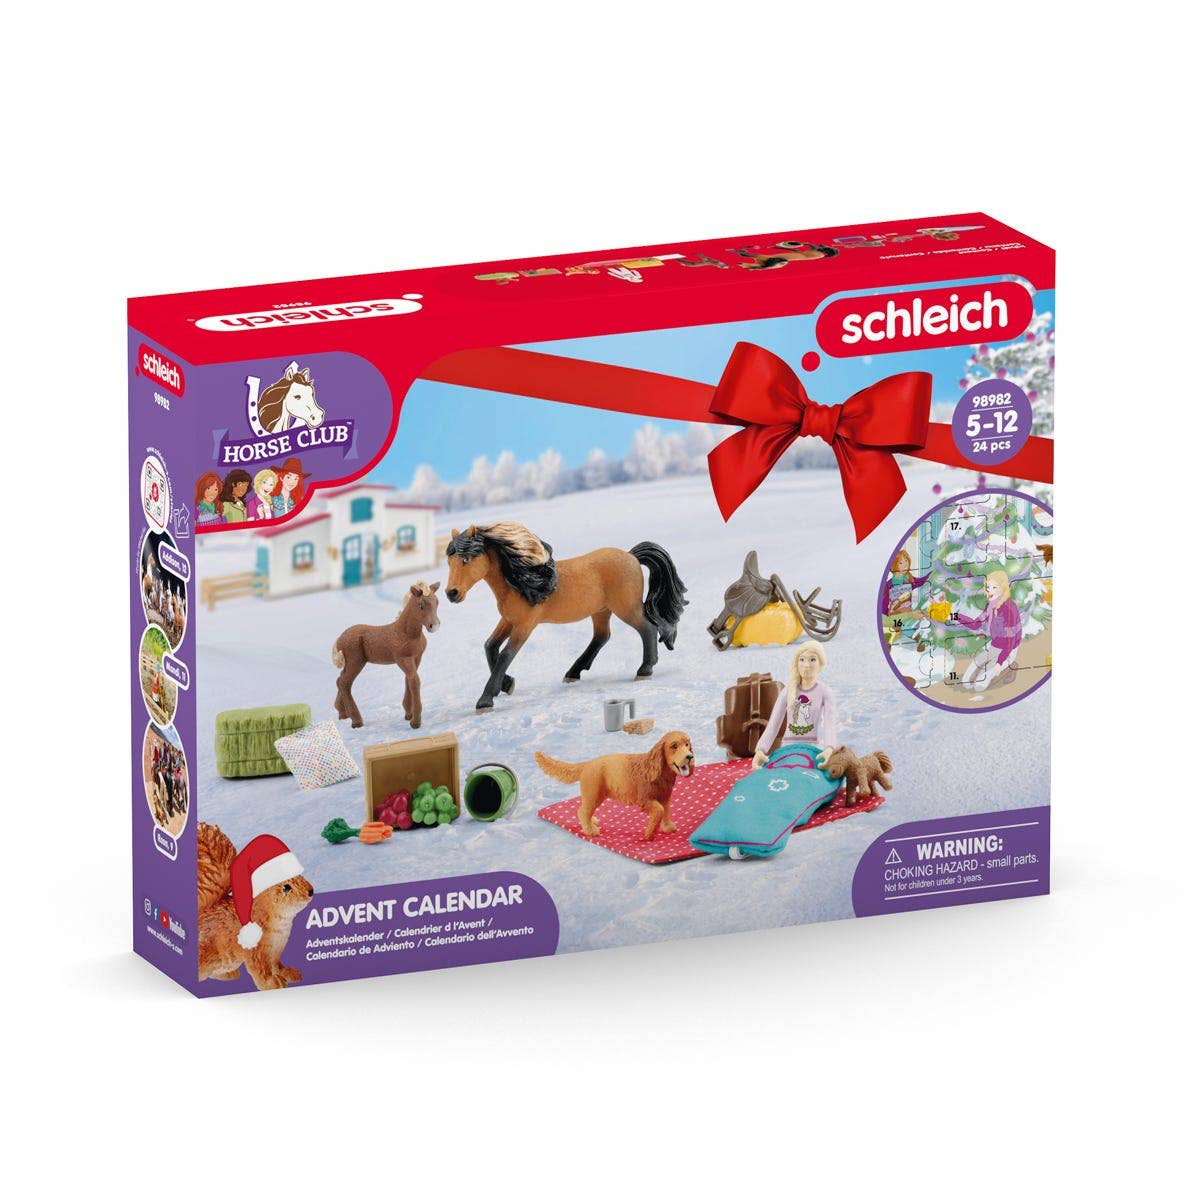 Advent Calendar with Rider and Toy Horse